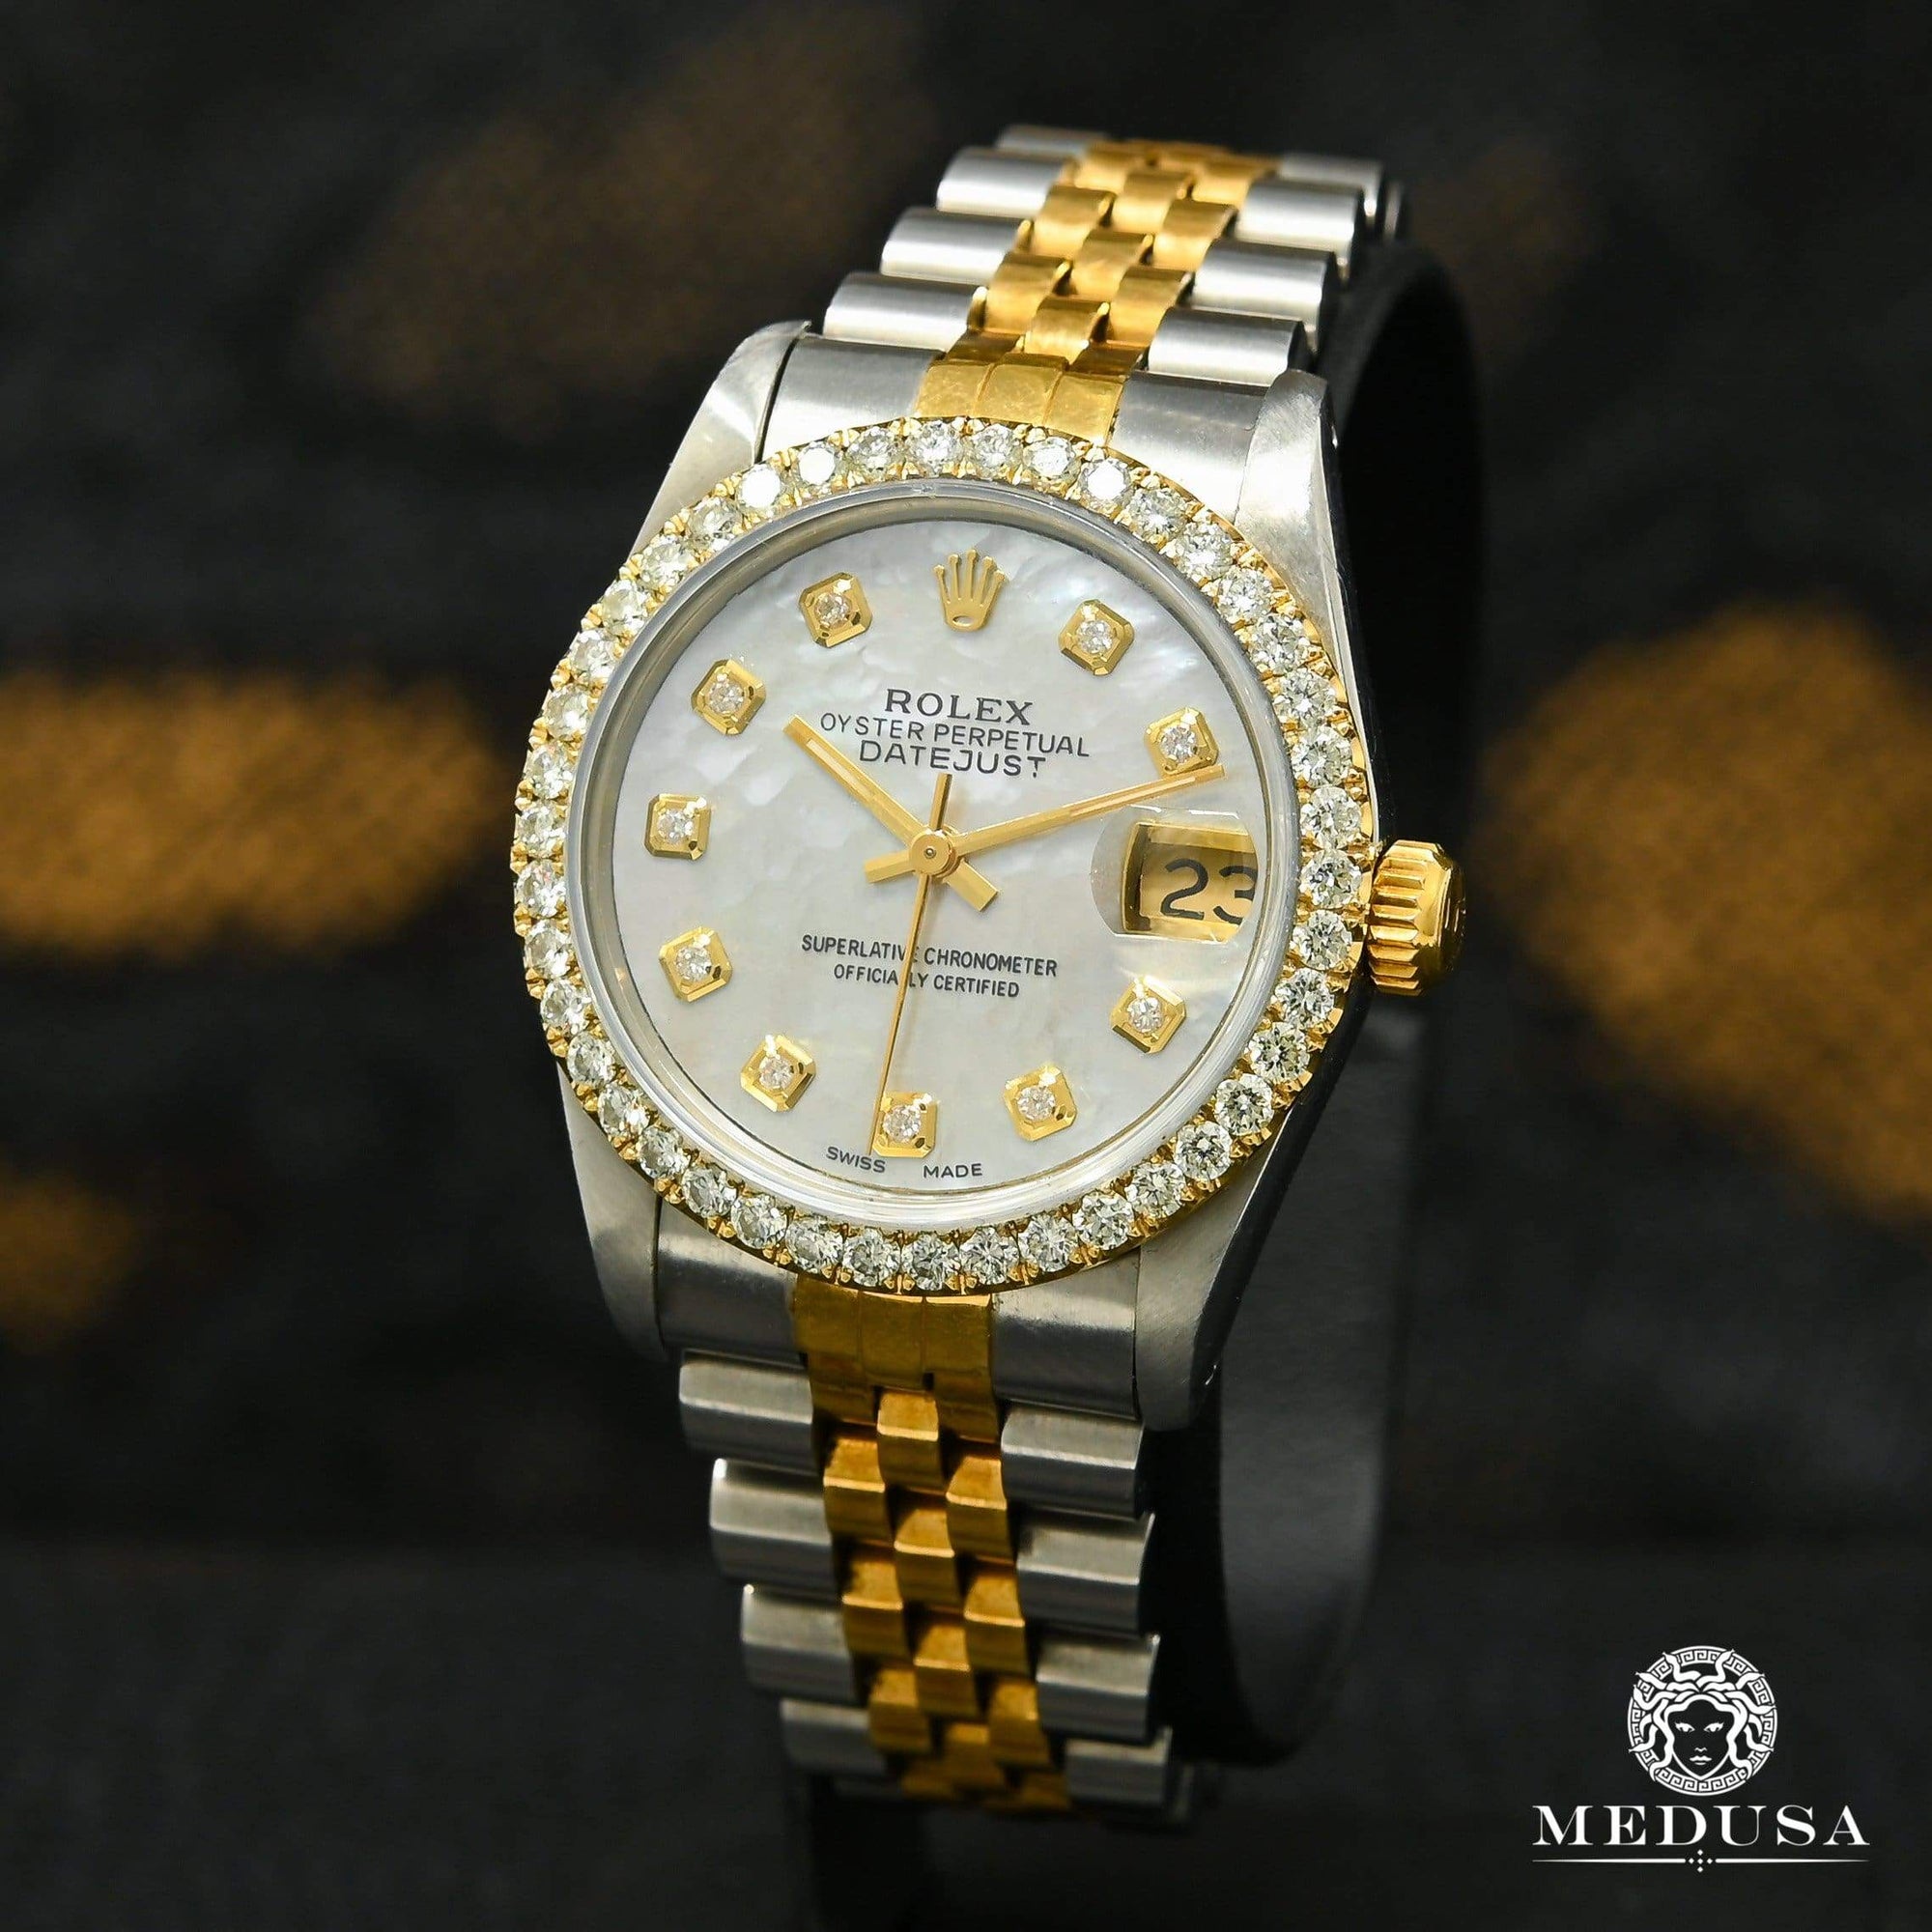 Montre Rolex | Montre Femme Rolex Lady-Datejust 31mm - White ’’Mother of Pearl’’ Or 2 Tons